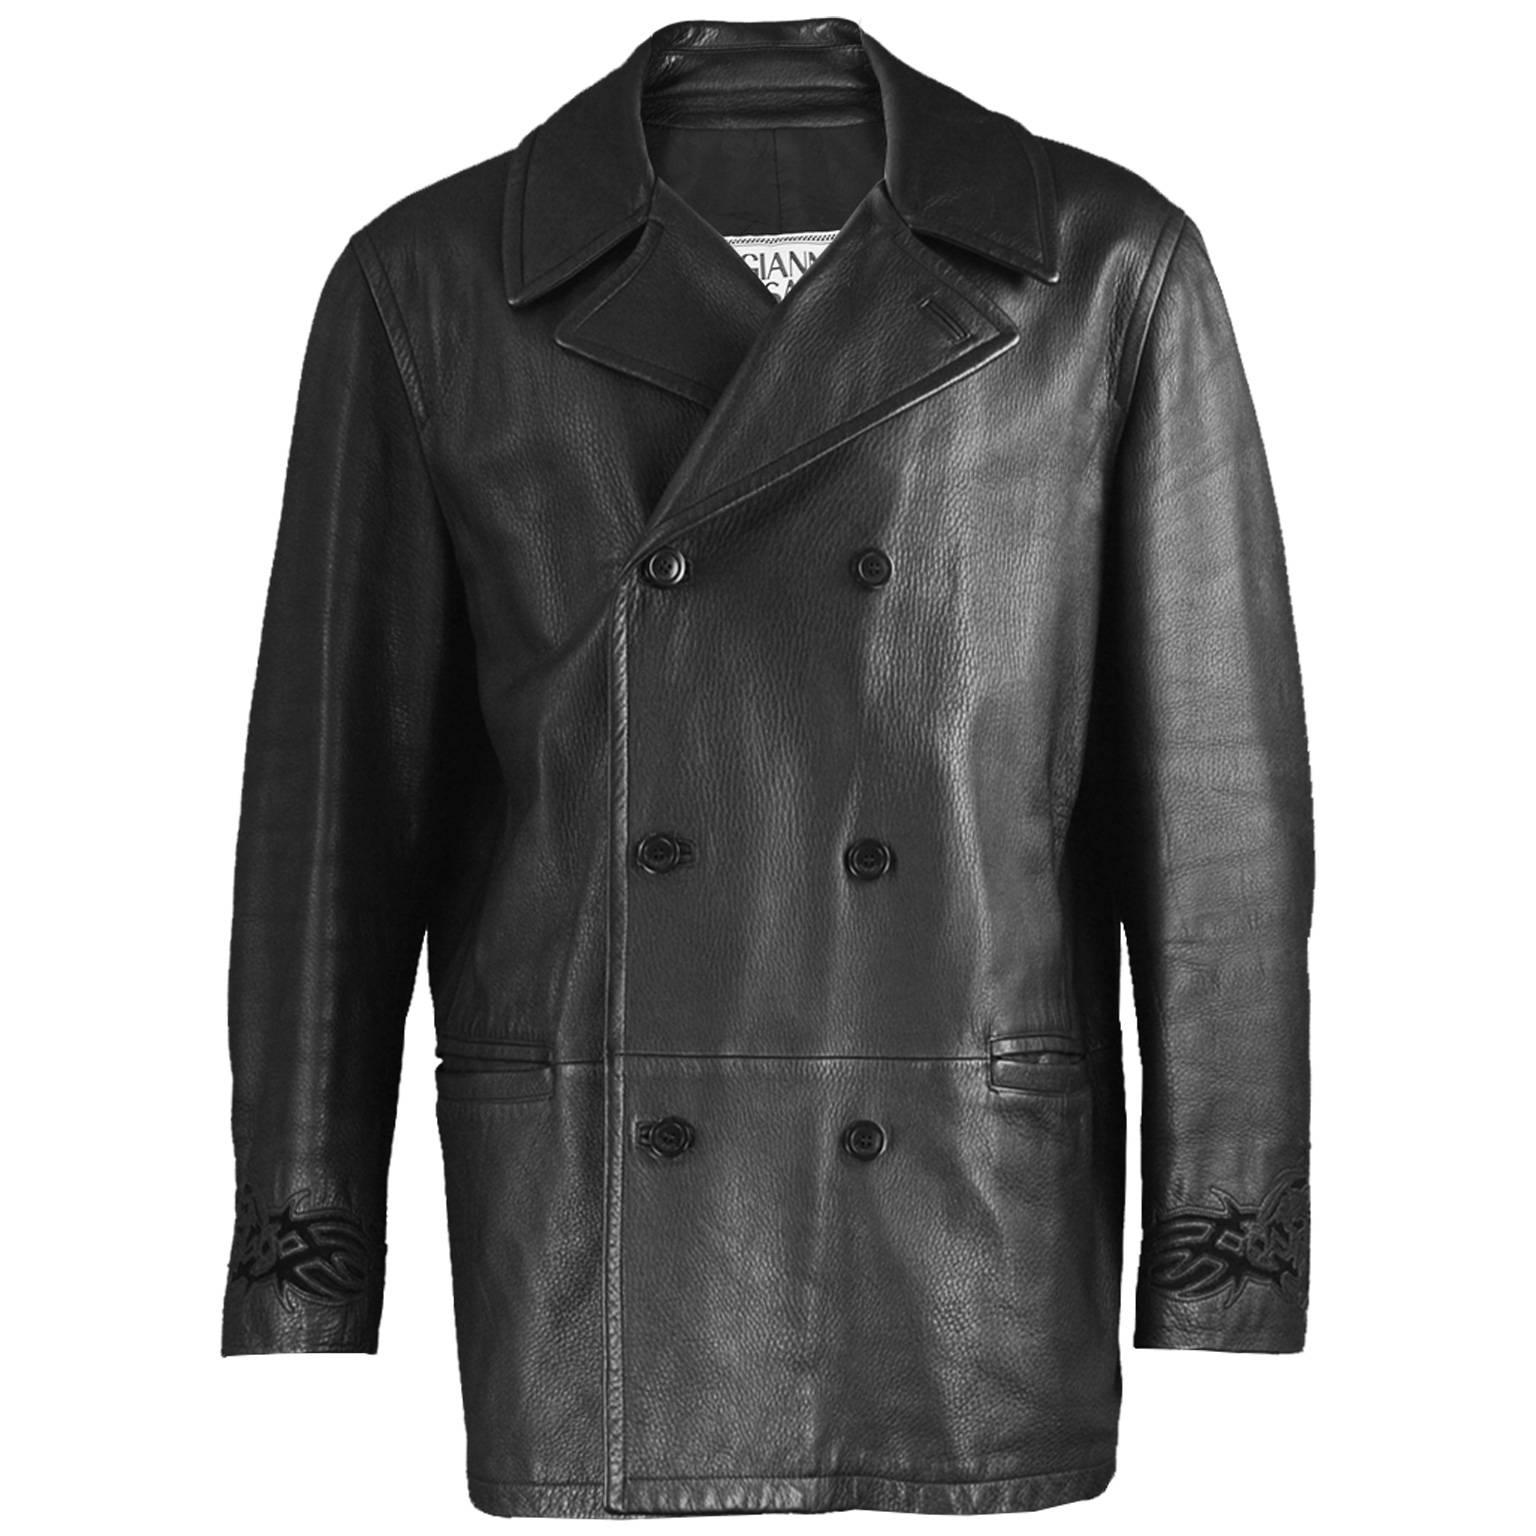 Gianni Versace Men's Black Leather Double Breasted Jacket, A/W 2002 